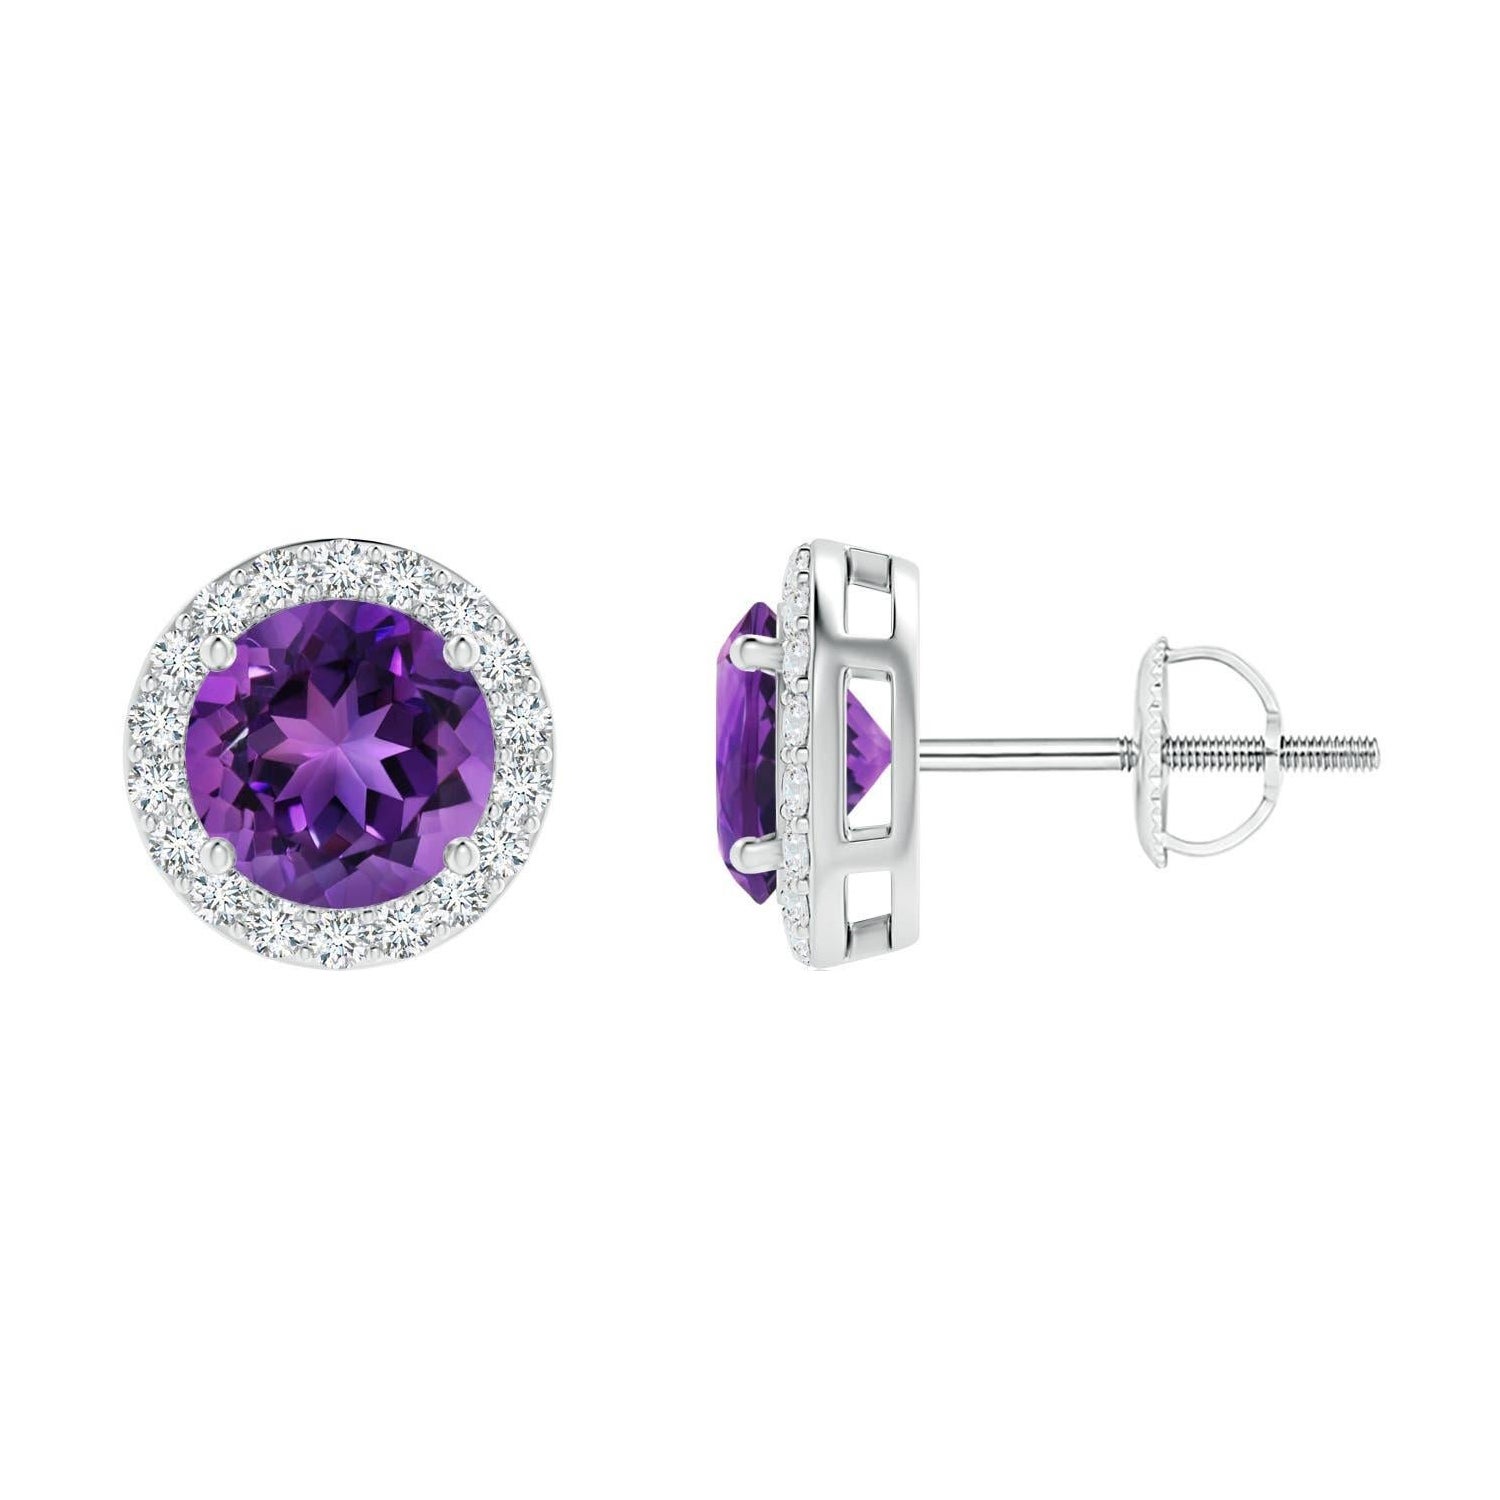 Natural Vintage Round 1.6ct Amethyst Halo Stud Earrings in 14K White Gold